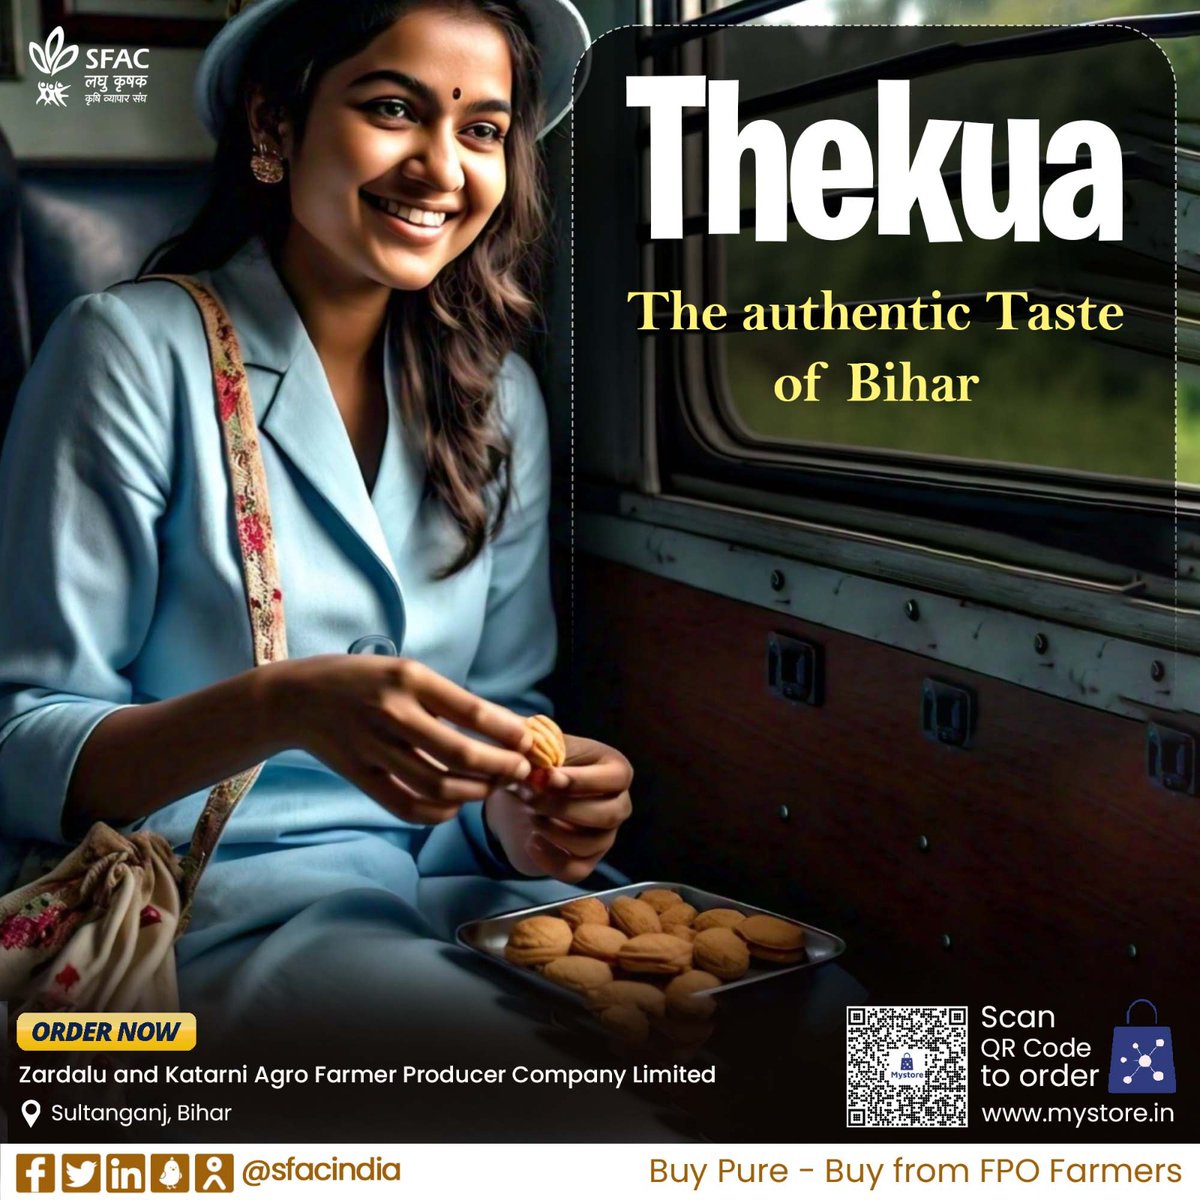 Thekua- best companion during travel😋 Healthy, tasty, filling & traditional. Buy straight from #Bihar FPO farmers. Order at👇 mystore.in/en/product/the… Simply yummy😋 #VocalForLocal #healthychoices #healthyeating #healthyhabits #tastyrecipes #tastybreakfast